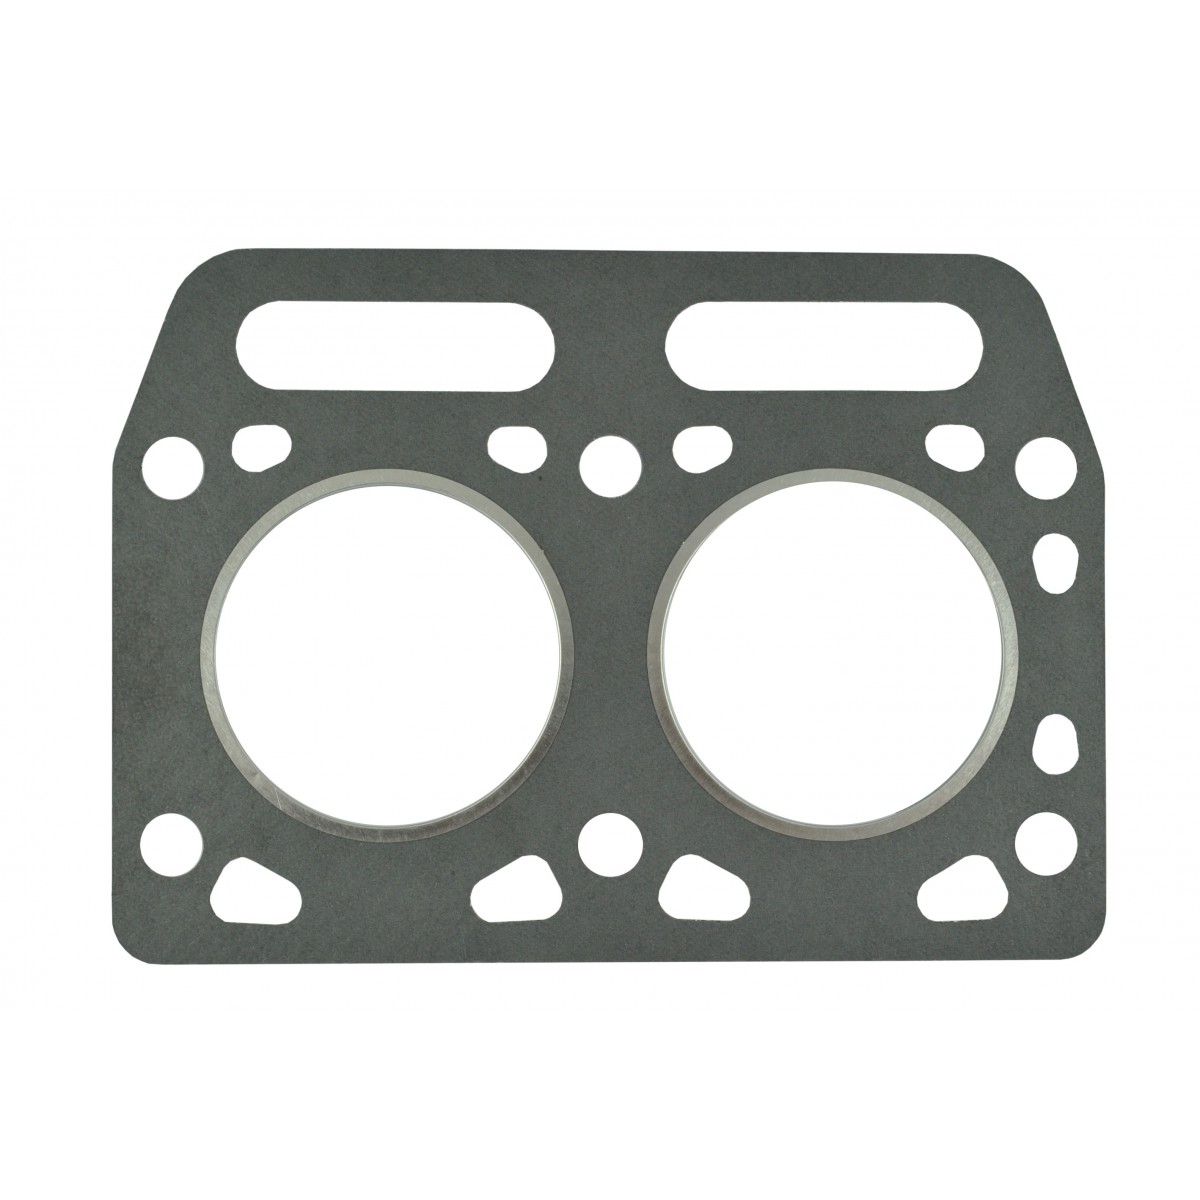 Gasket for 2-cylinder heads with a piston diameter of 85 mm, Yanmar YM1700, 2TR17